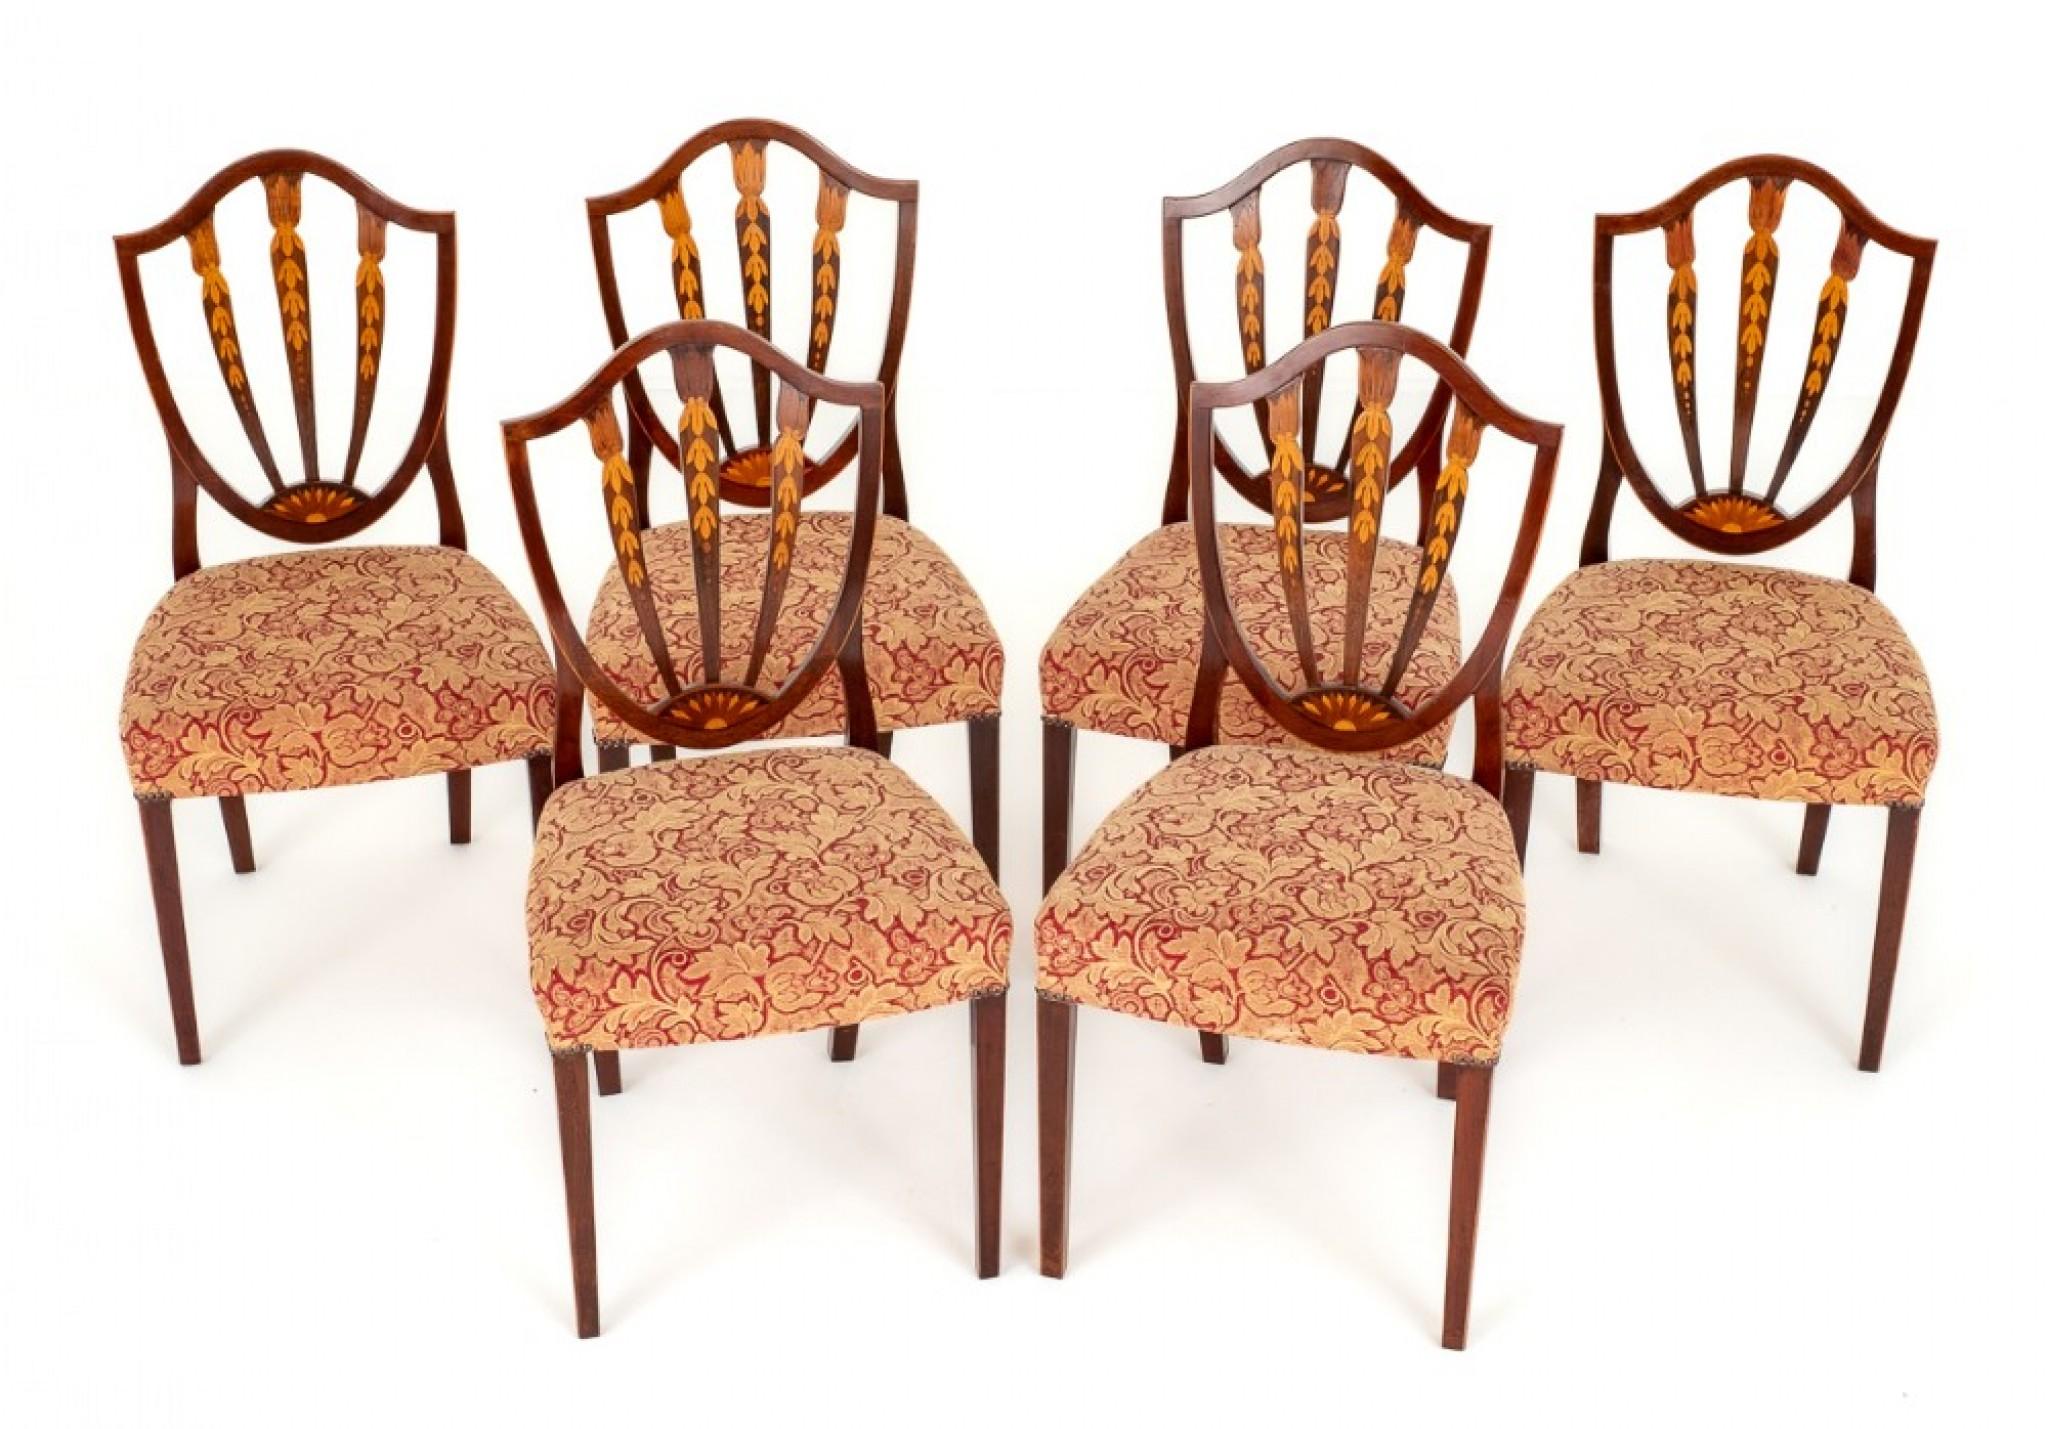 Set of 6 Mahogany Hepplewhite Style inlaid Dining Chairs.
These Rather Pretty Chairs Stand upon Tapered Legs.
The Seats Being of a Stuff Over Form (very comfortable)
the Backs of The Chairs are of a Shield Form and Feature Marquetry Inlays.
Circa